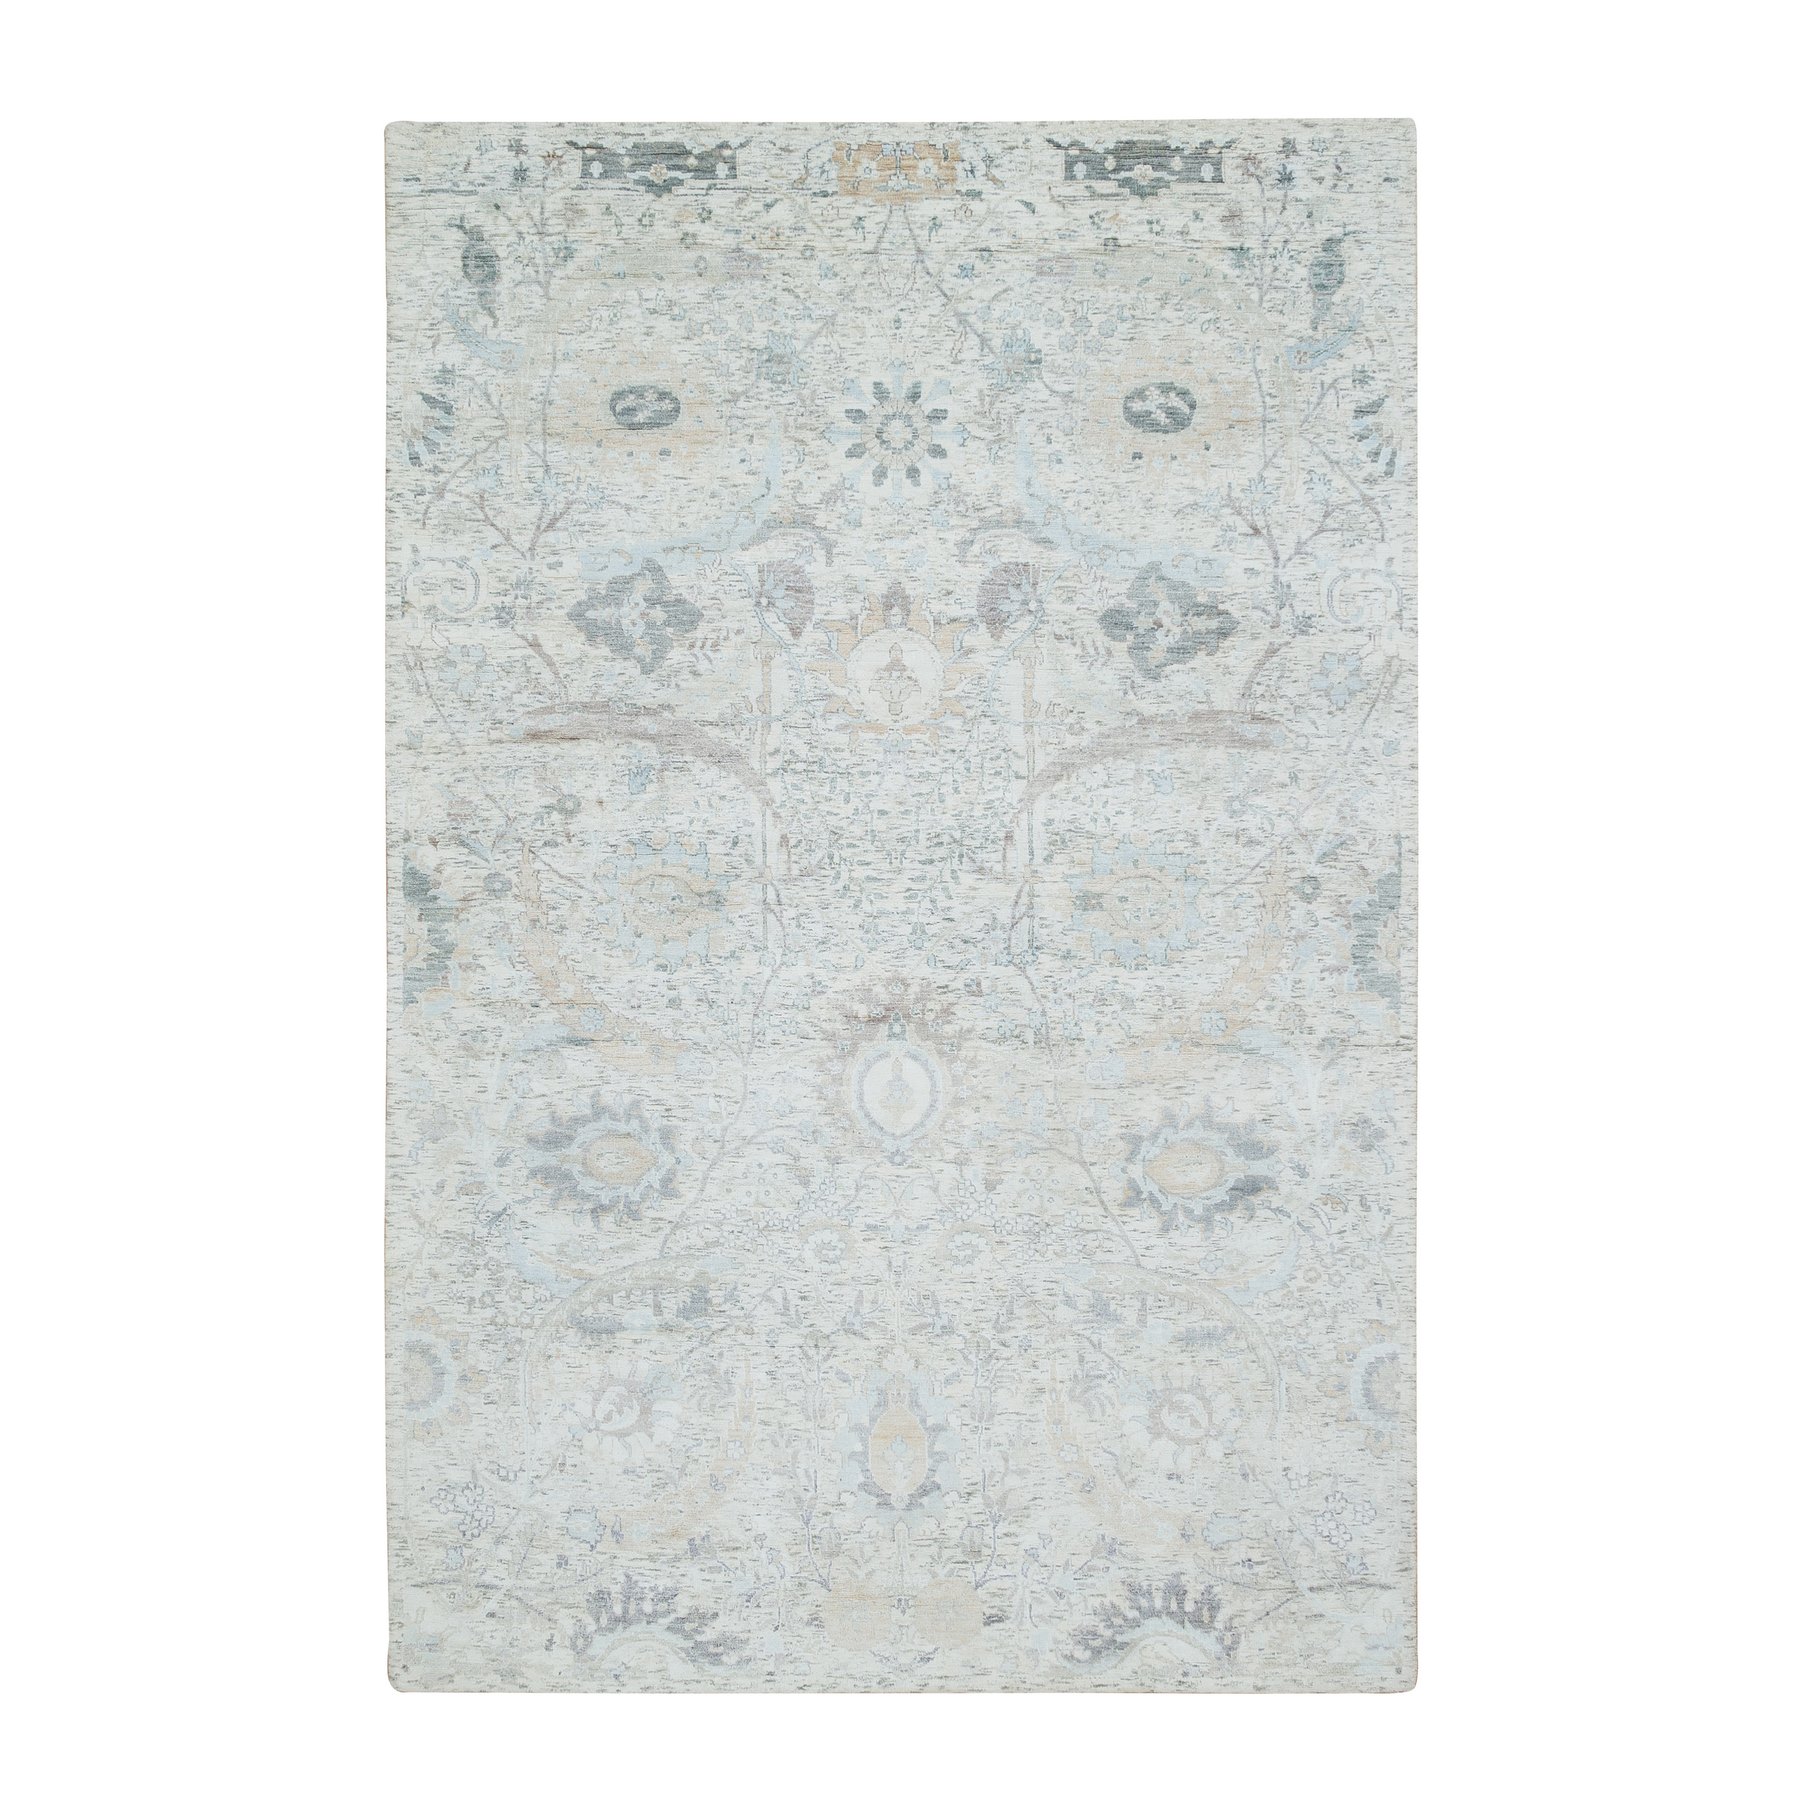 6'1"x9' Ivory, Silk With Textured Wool Hand Woven, Sickle Leaf Design Soft Pile, Oriental Rug 